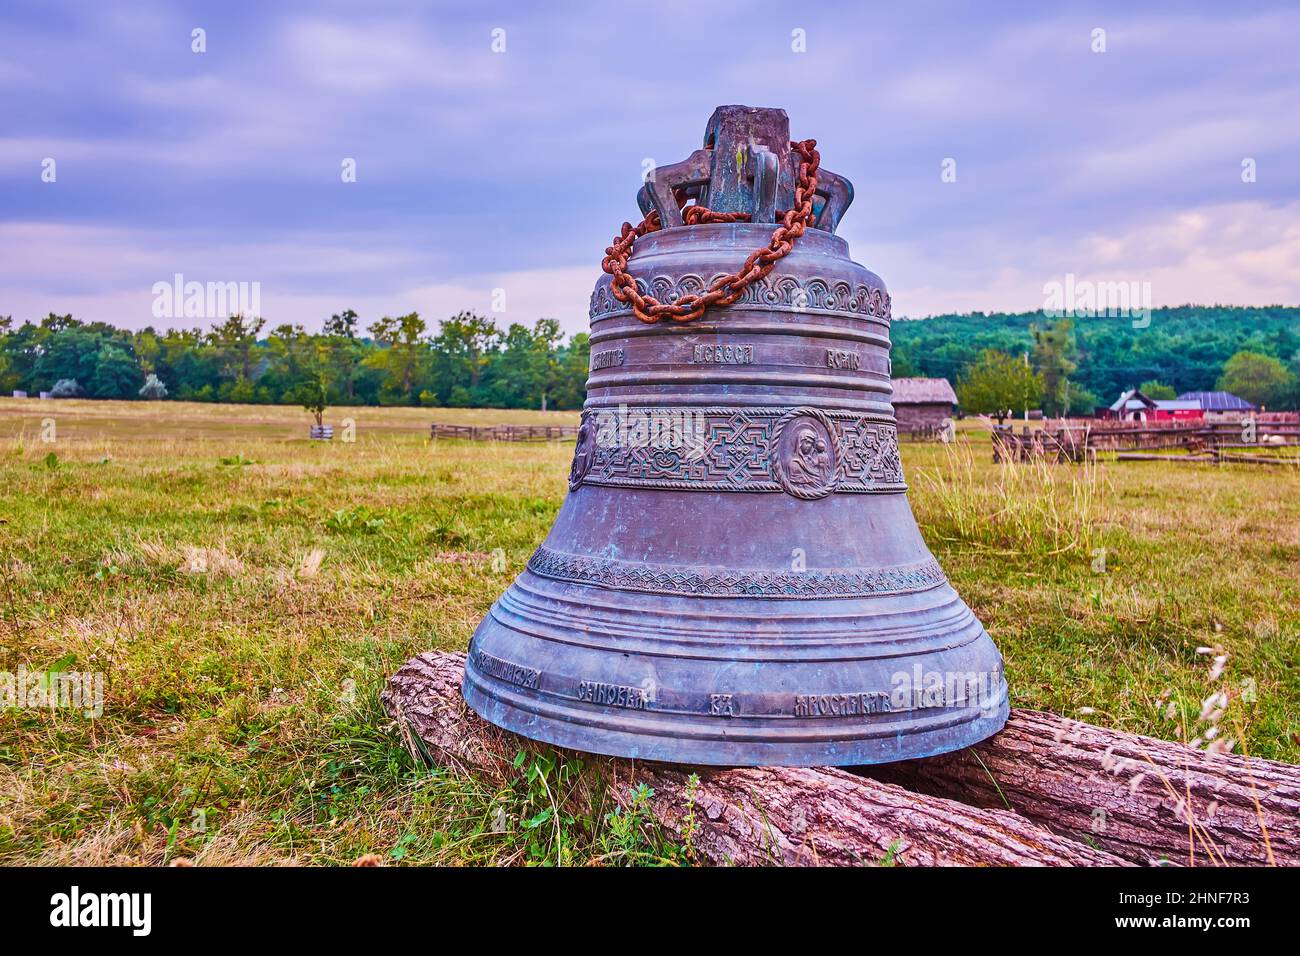 The bronze bell at St Nicholas church decorated with patterns and relief images of Virgin Mary, Cossack Village Scensen, Ukraine Stock Photo